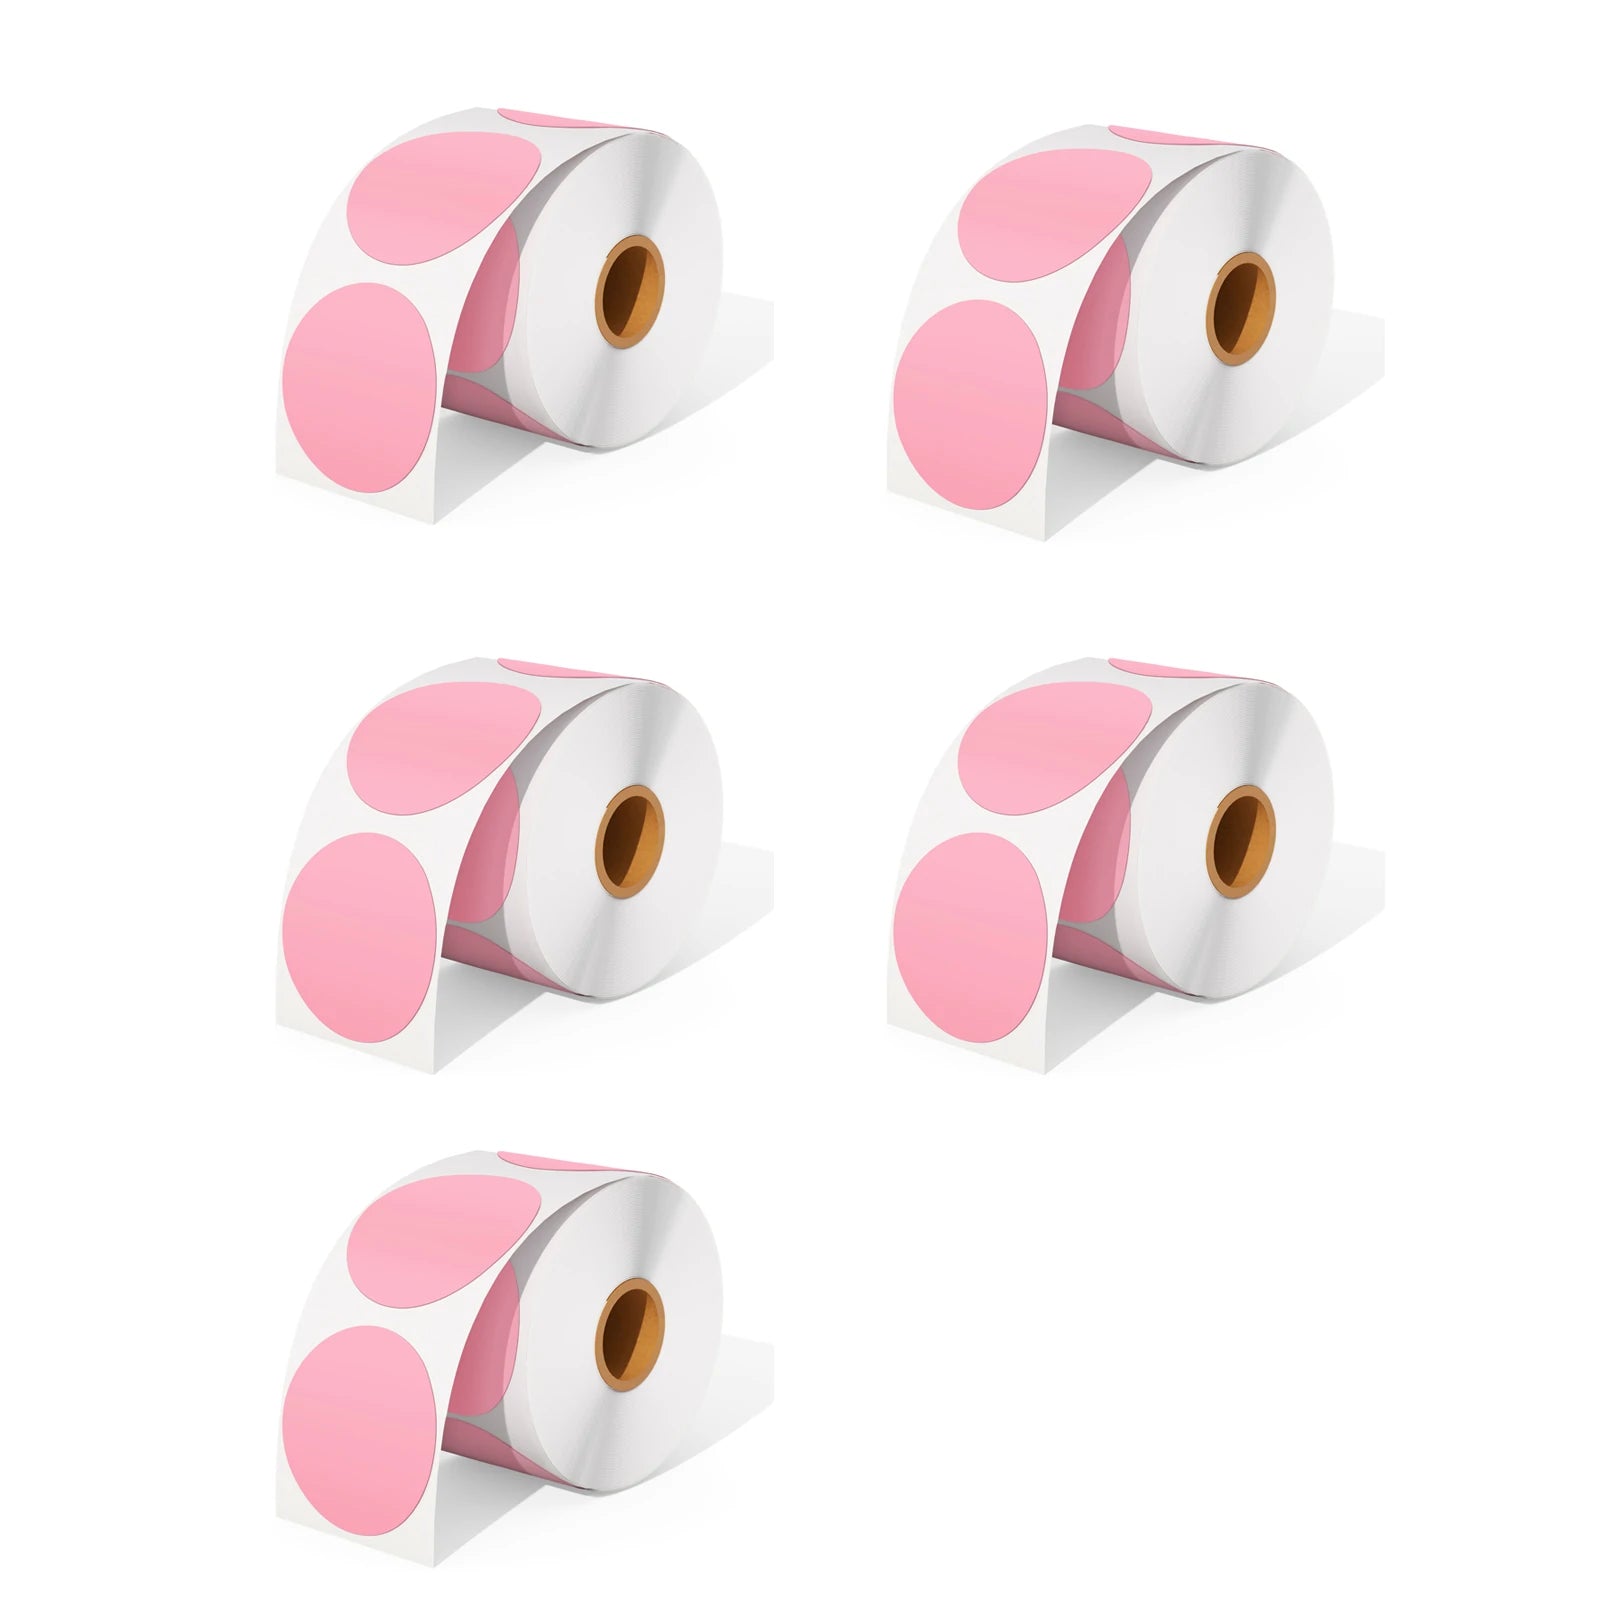 MUNBYN offers five rolls of pink direct thermal round labels as a kit, with 750 labels per roll.